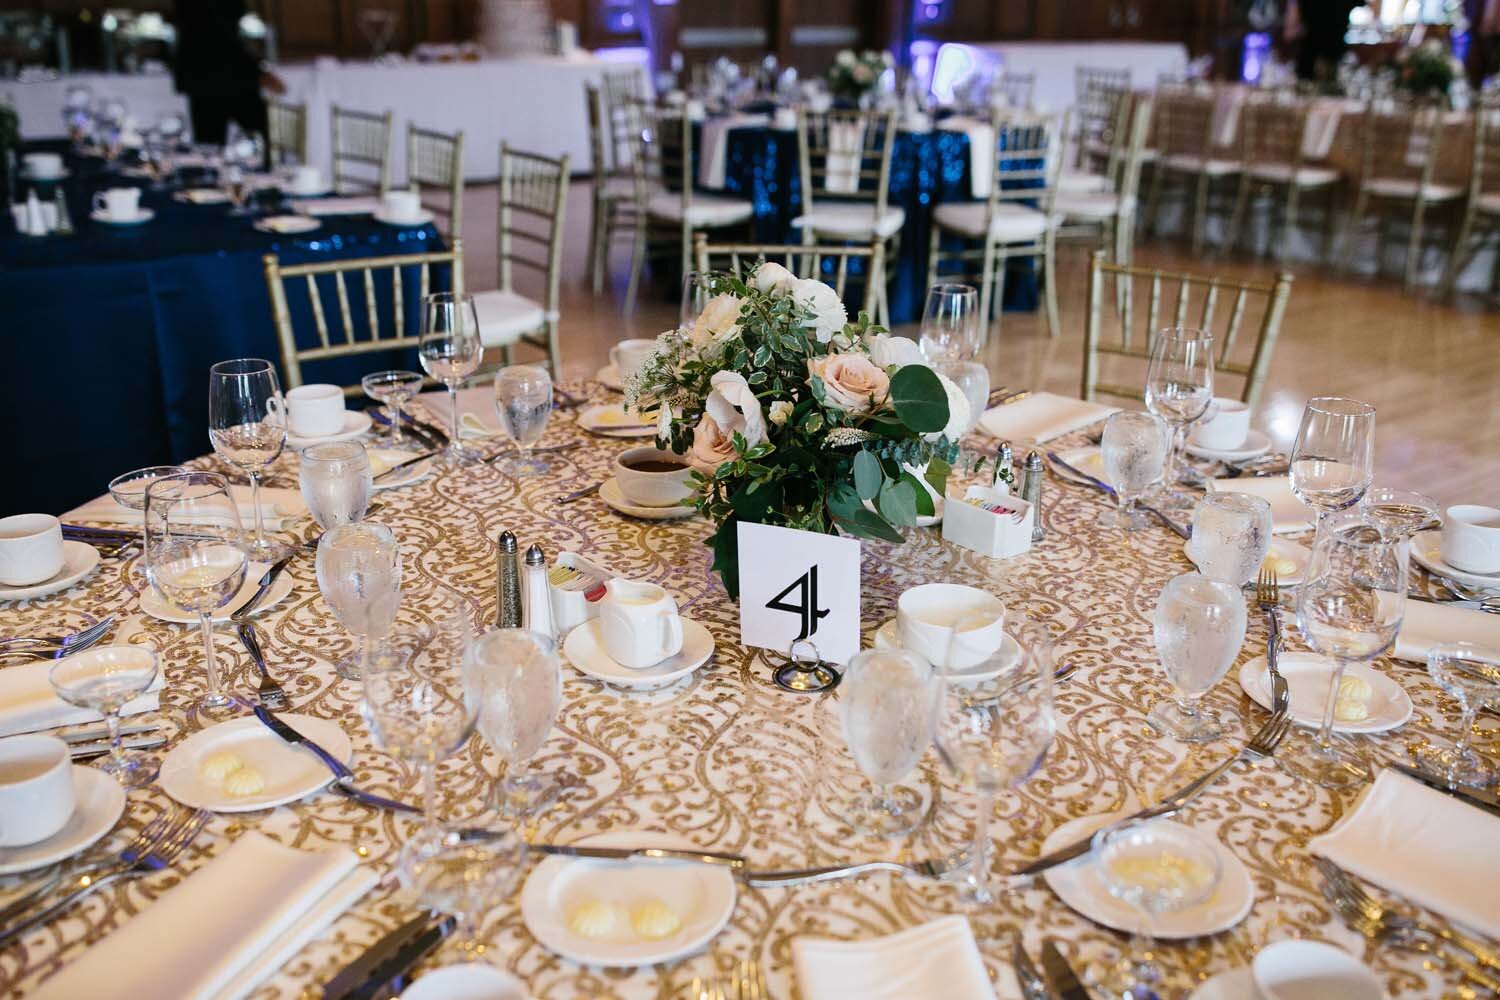 Flower centerpieces at the michigan league